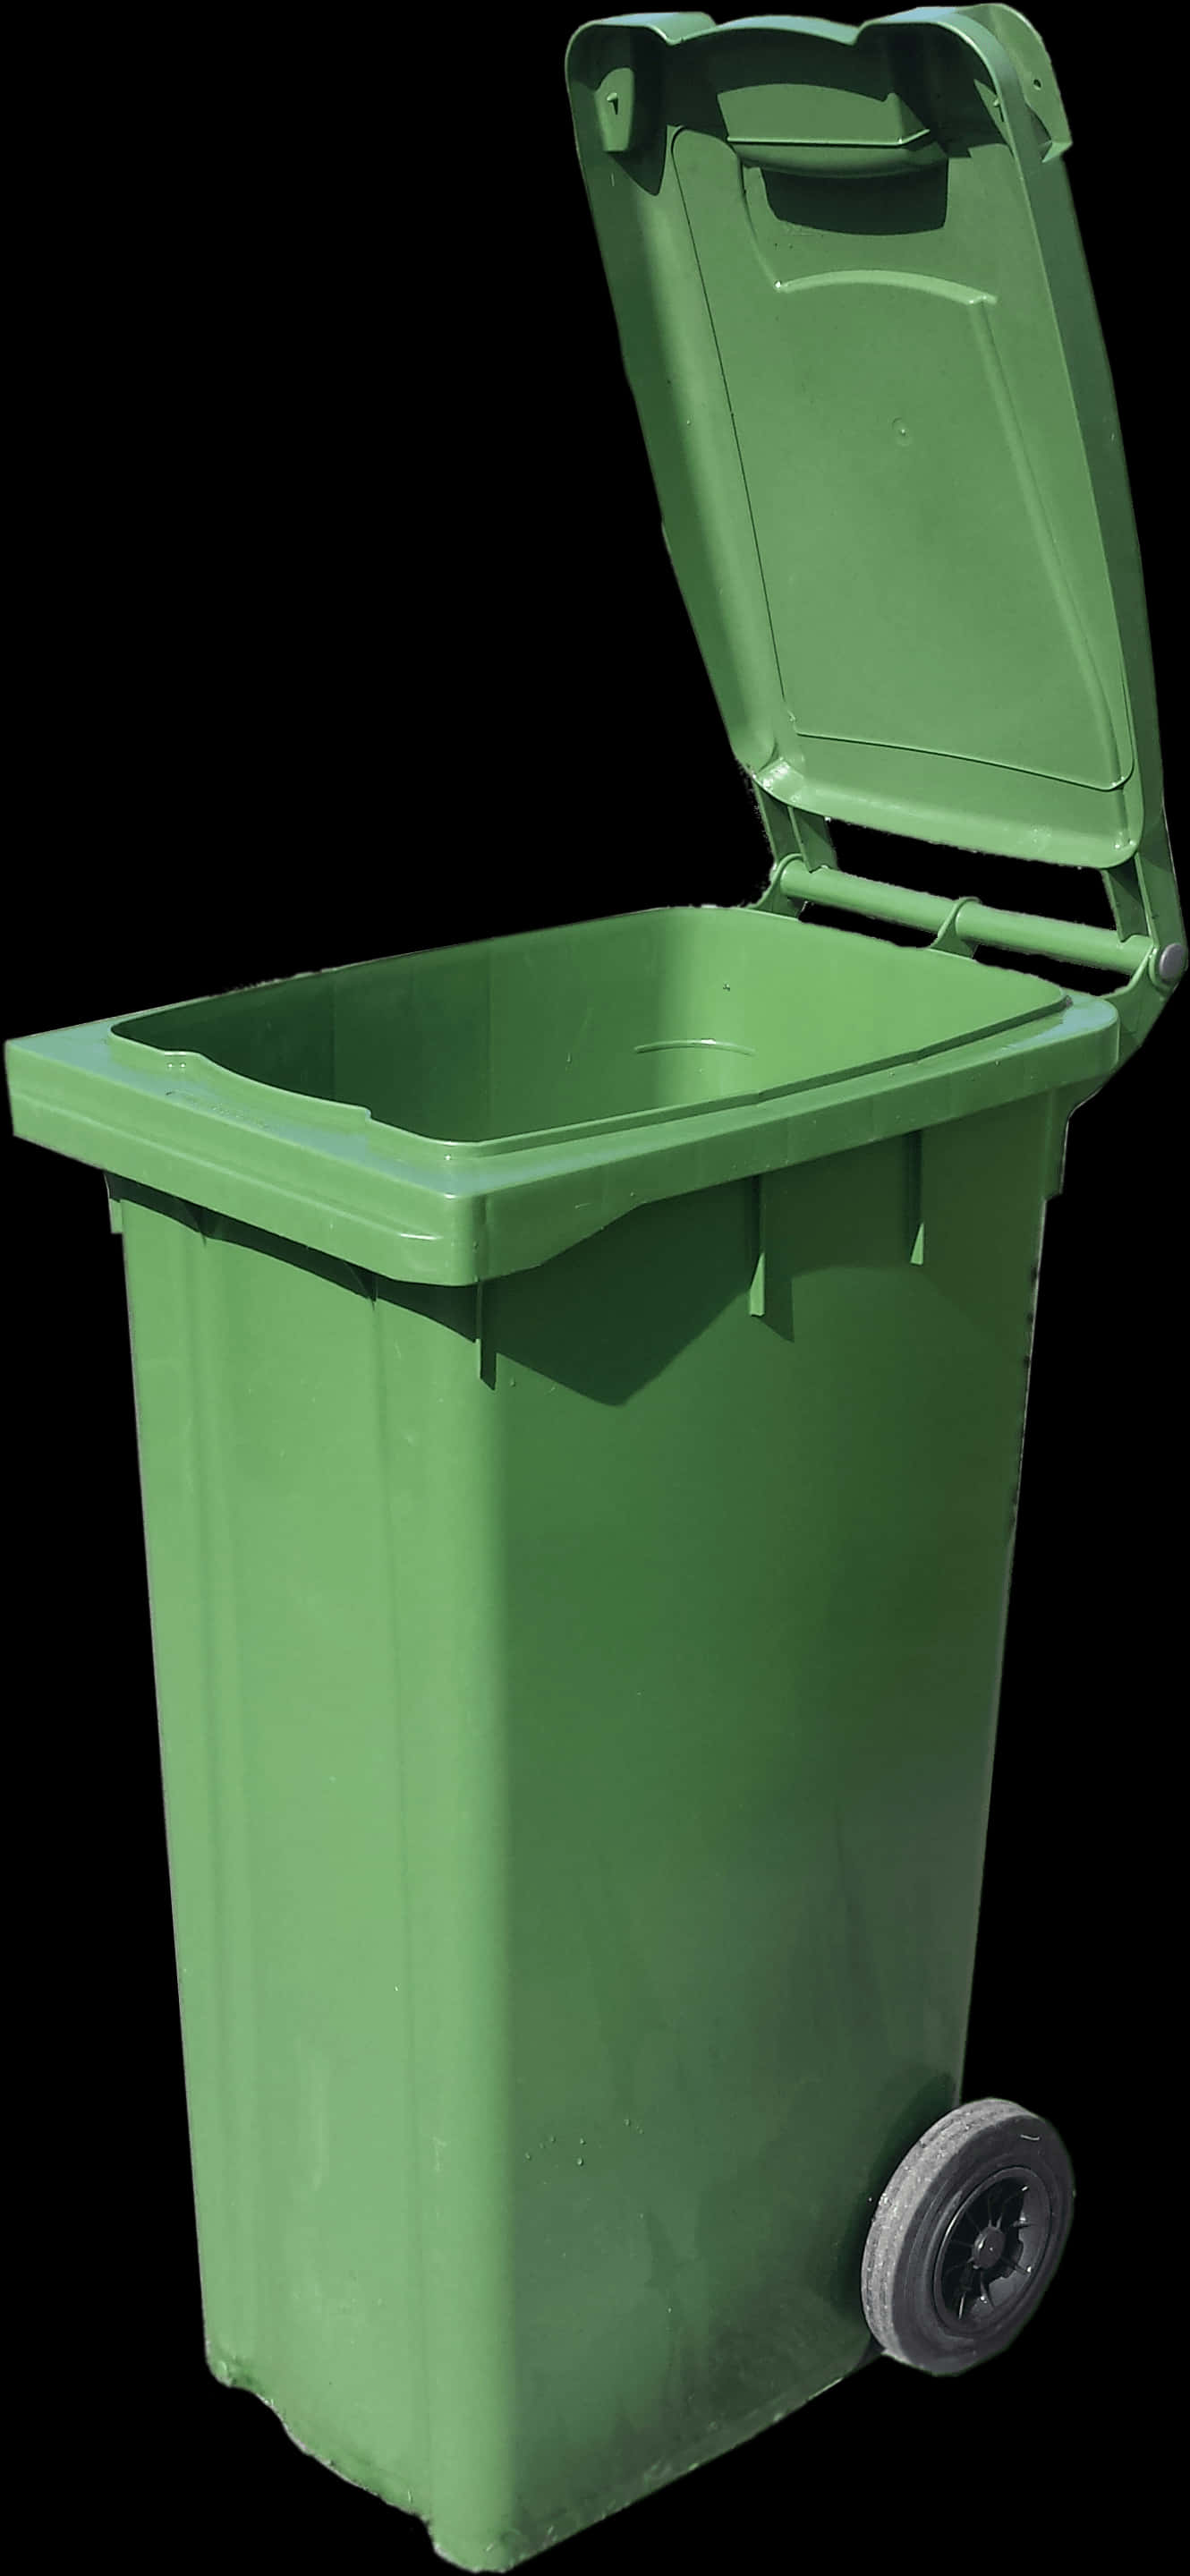 A Green Plastic Bin With A Lid Open